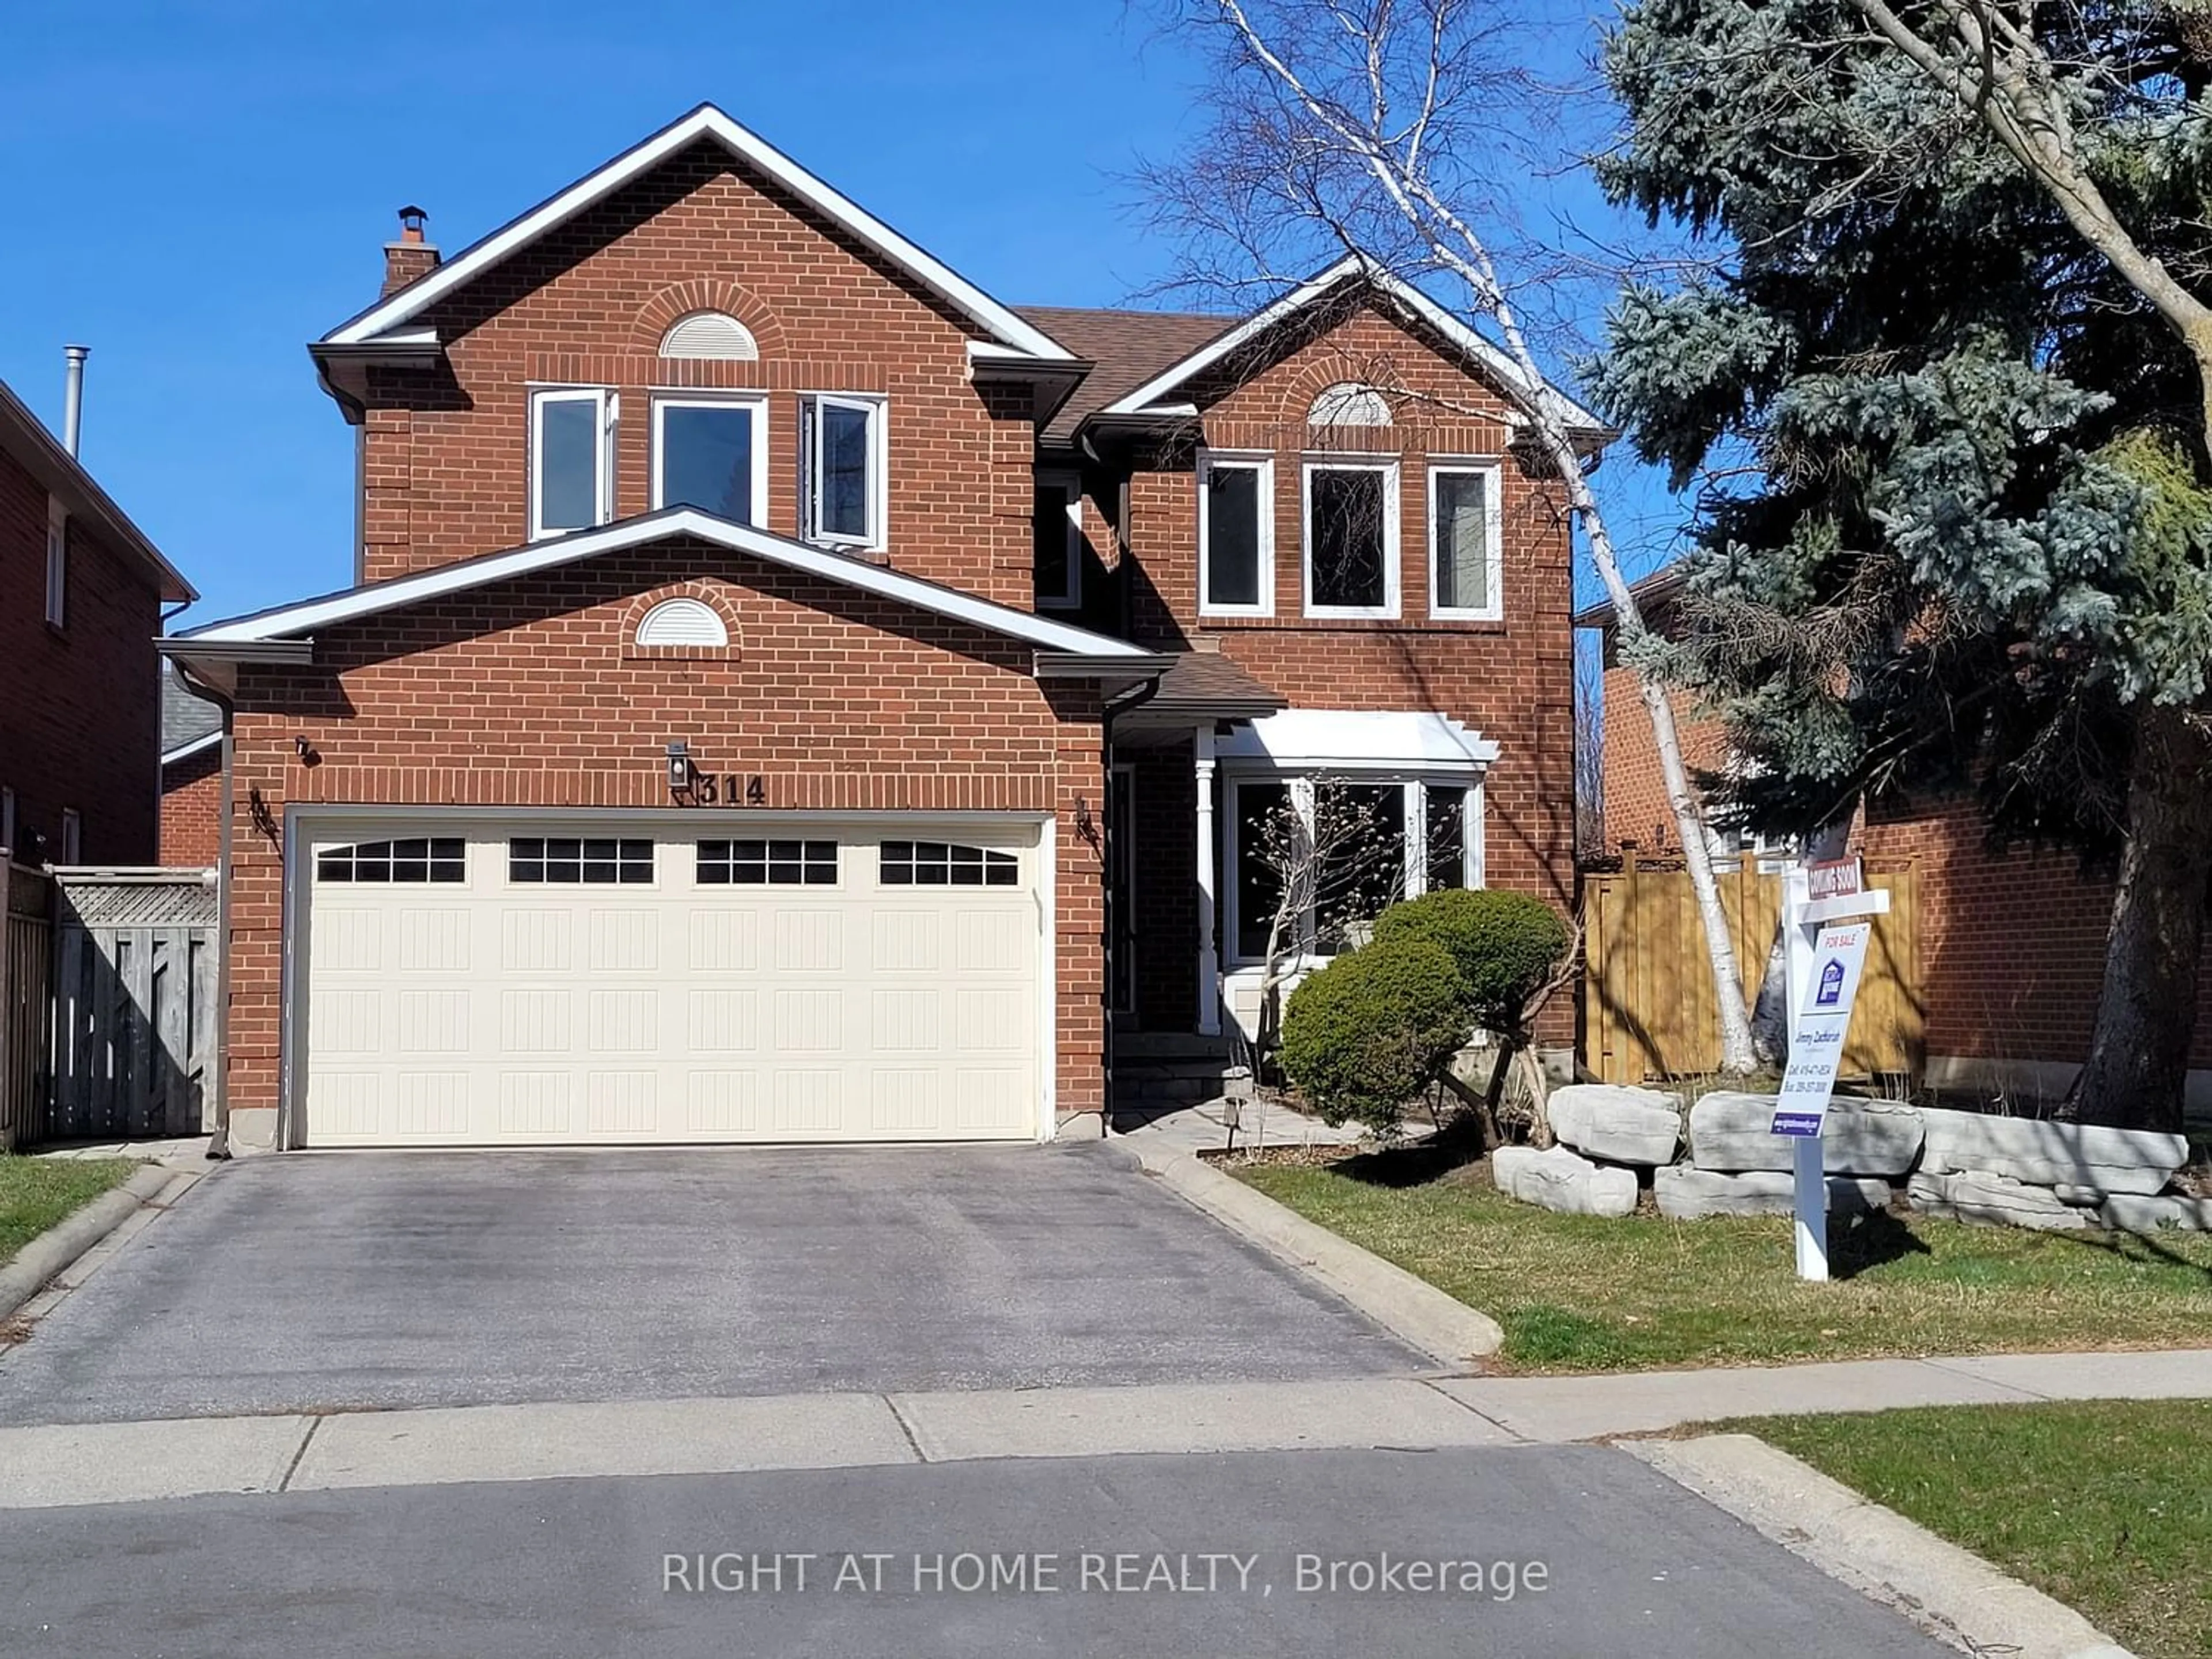 Home with brick exterior material for 314 Greenock Dr, Vaughan Ontario L6A 1V5